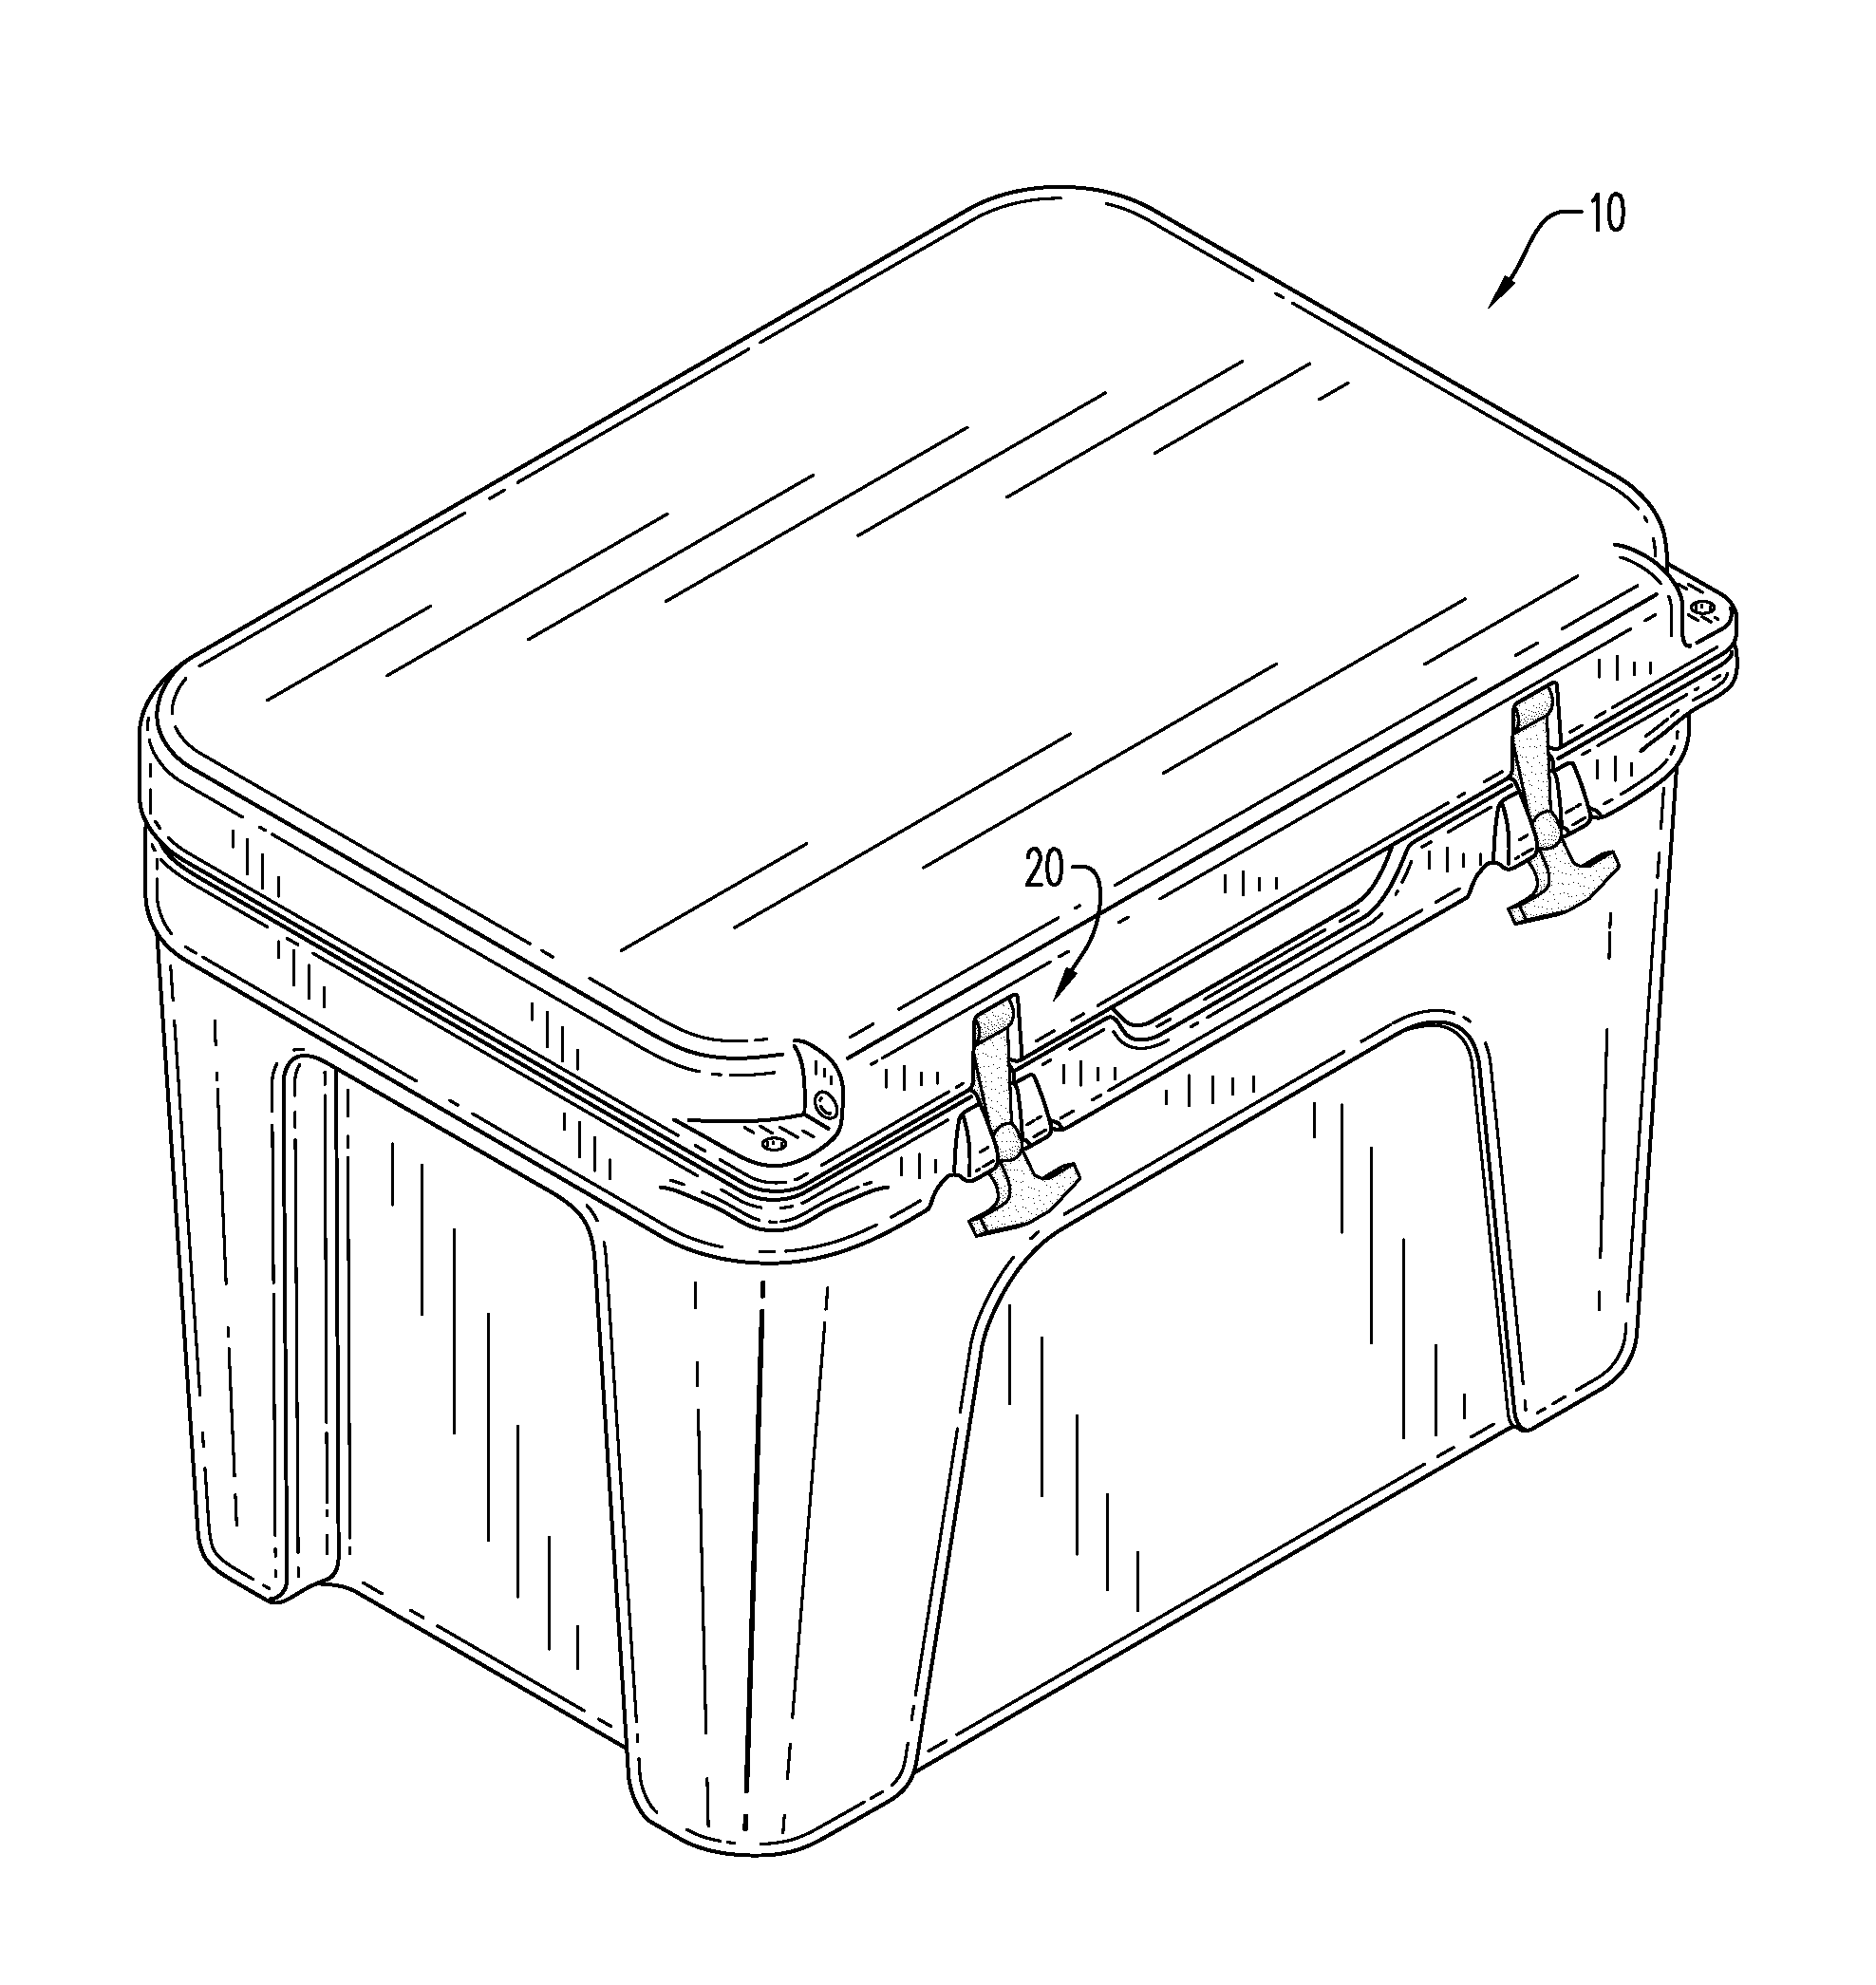 Insulating container and latching mechanism